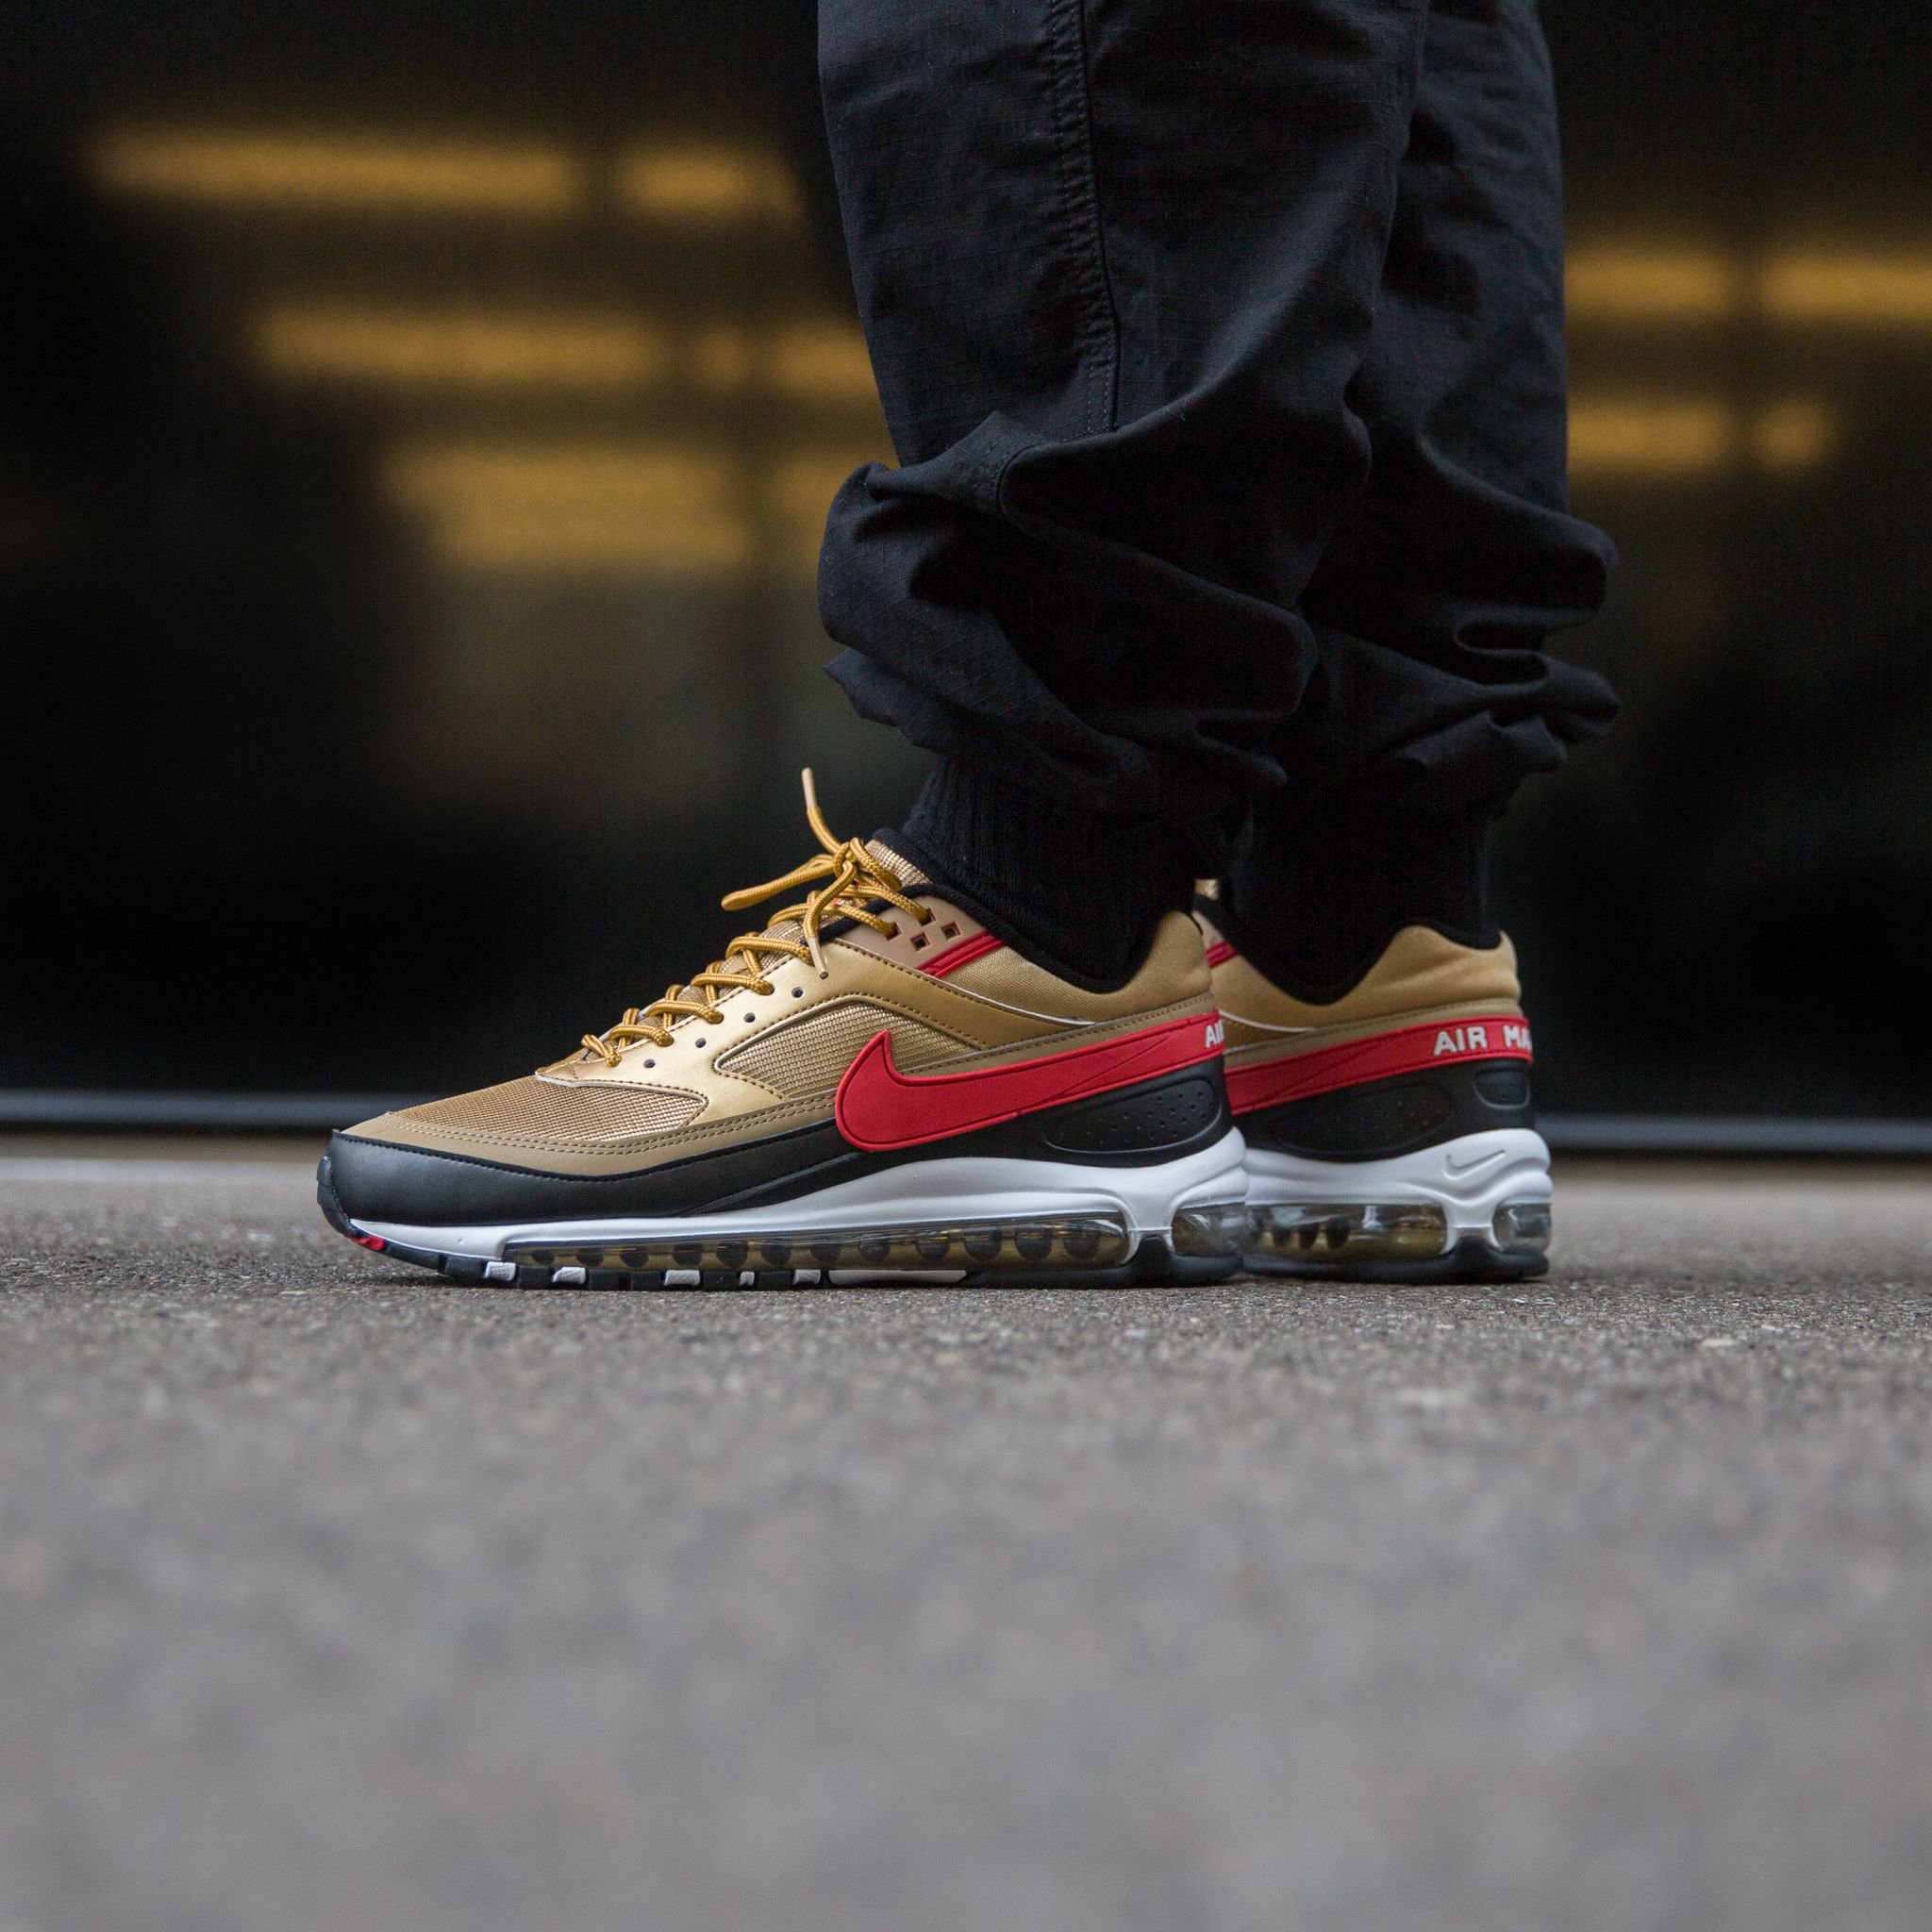 doel profiel neem medicijnen Titolo on Twitter: "Check this out! 💥 Nike Air Max 97/Bw - Metallic Gold/University  red-White-Black on SALE N O W 🎁 https://t.co/7DSxuYZh6U #nike #airmax # airmax97 #bw #airmaxbw #airmax97bw #gold #red #black #sale #